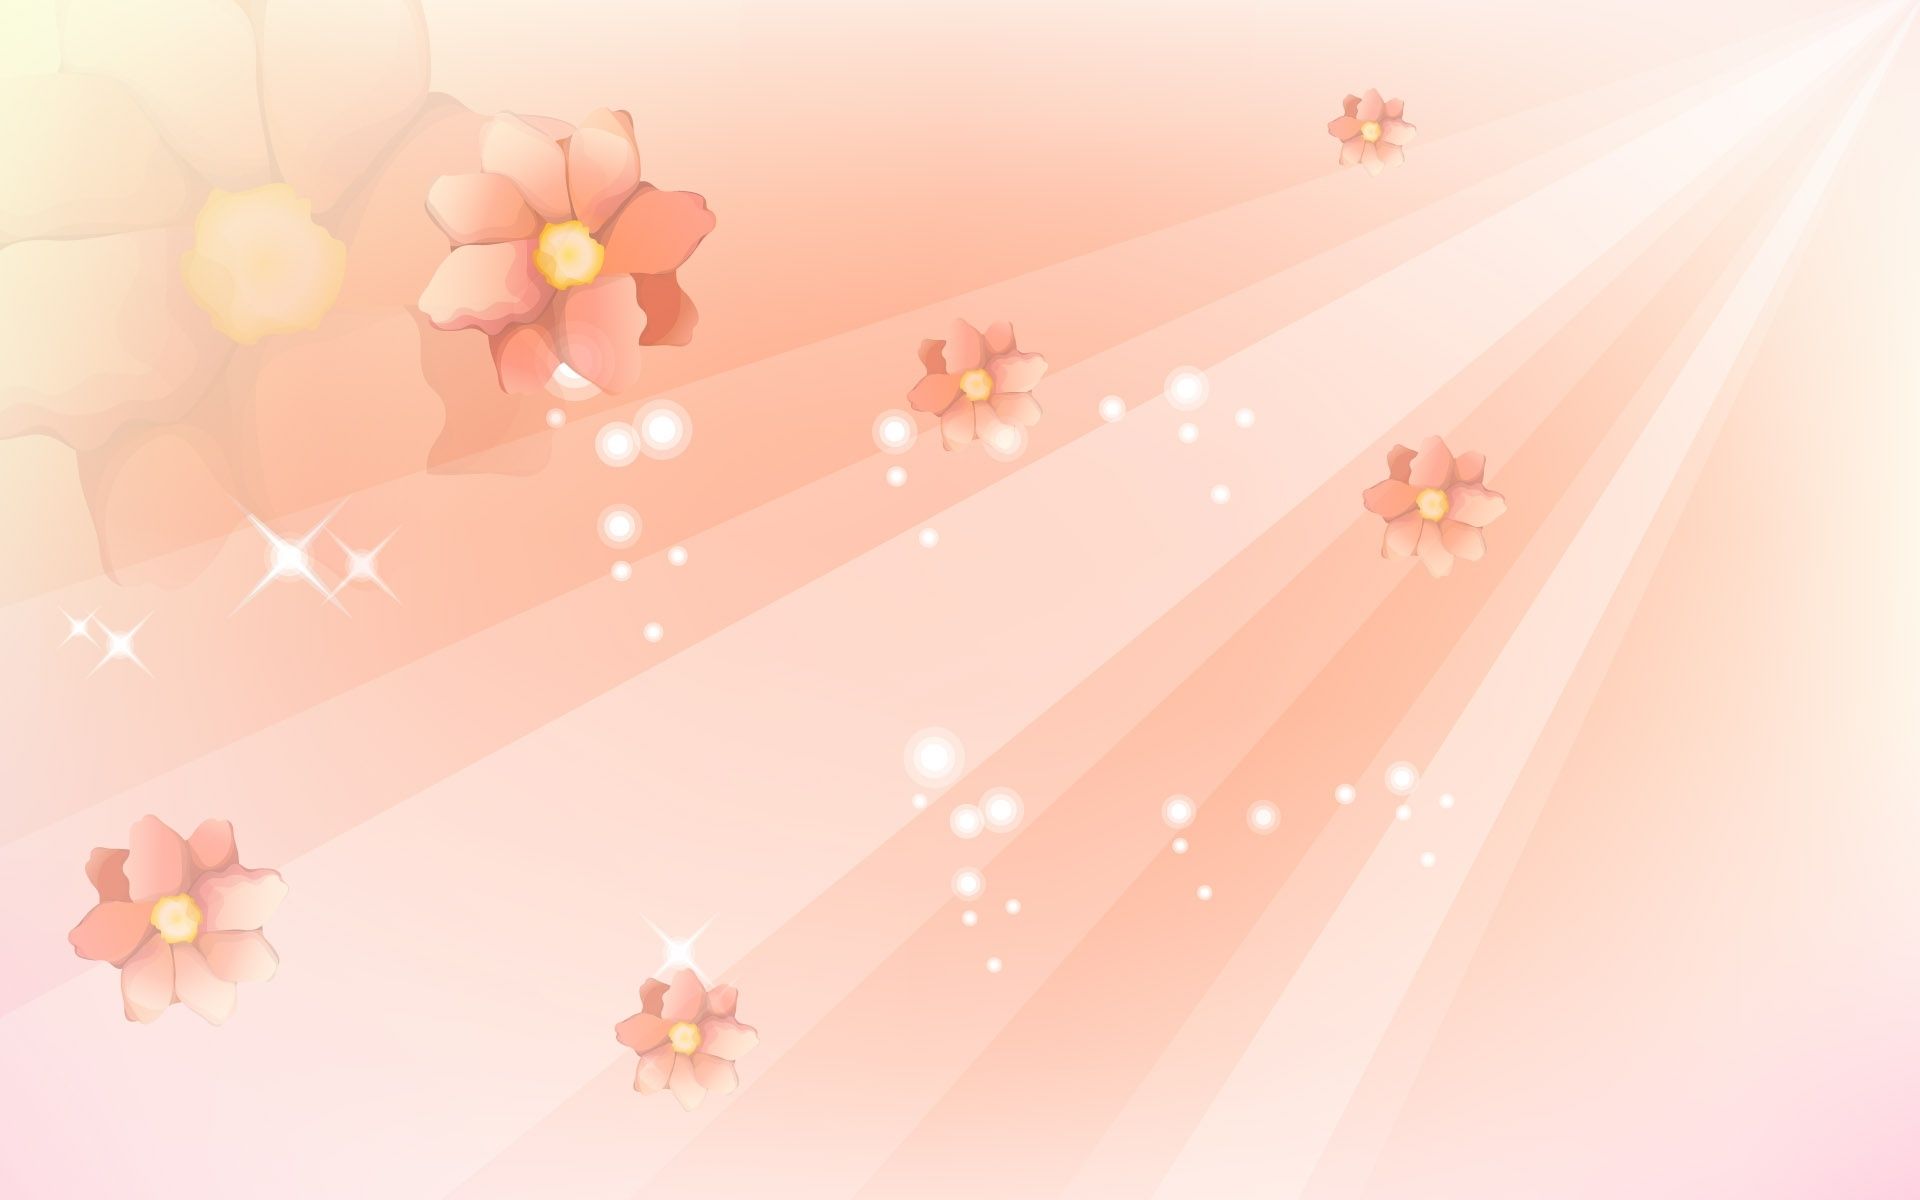 Bright Pink Flowers Background wallpaper 1920x1200